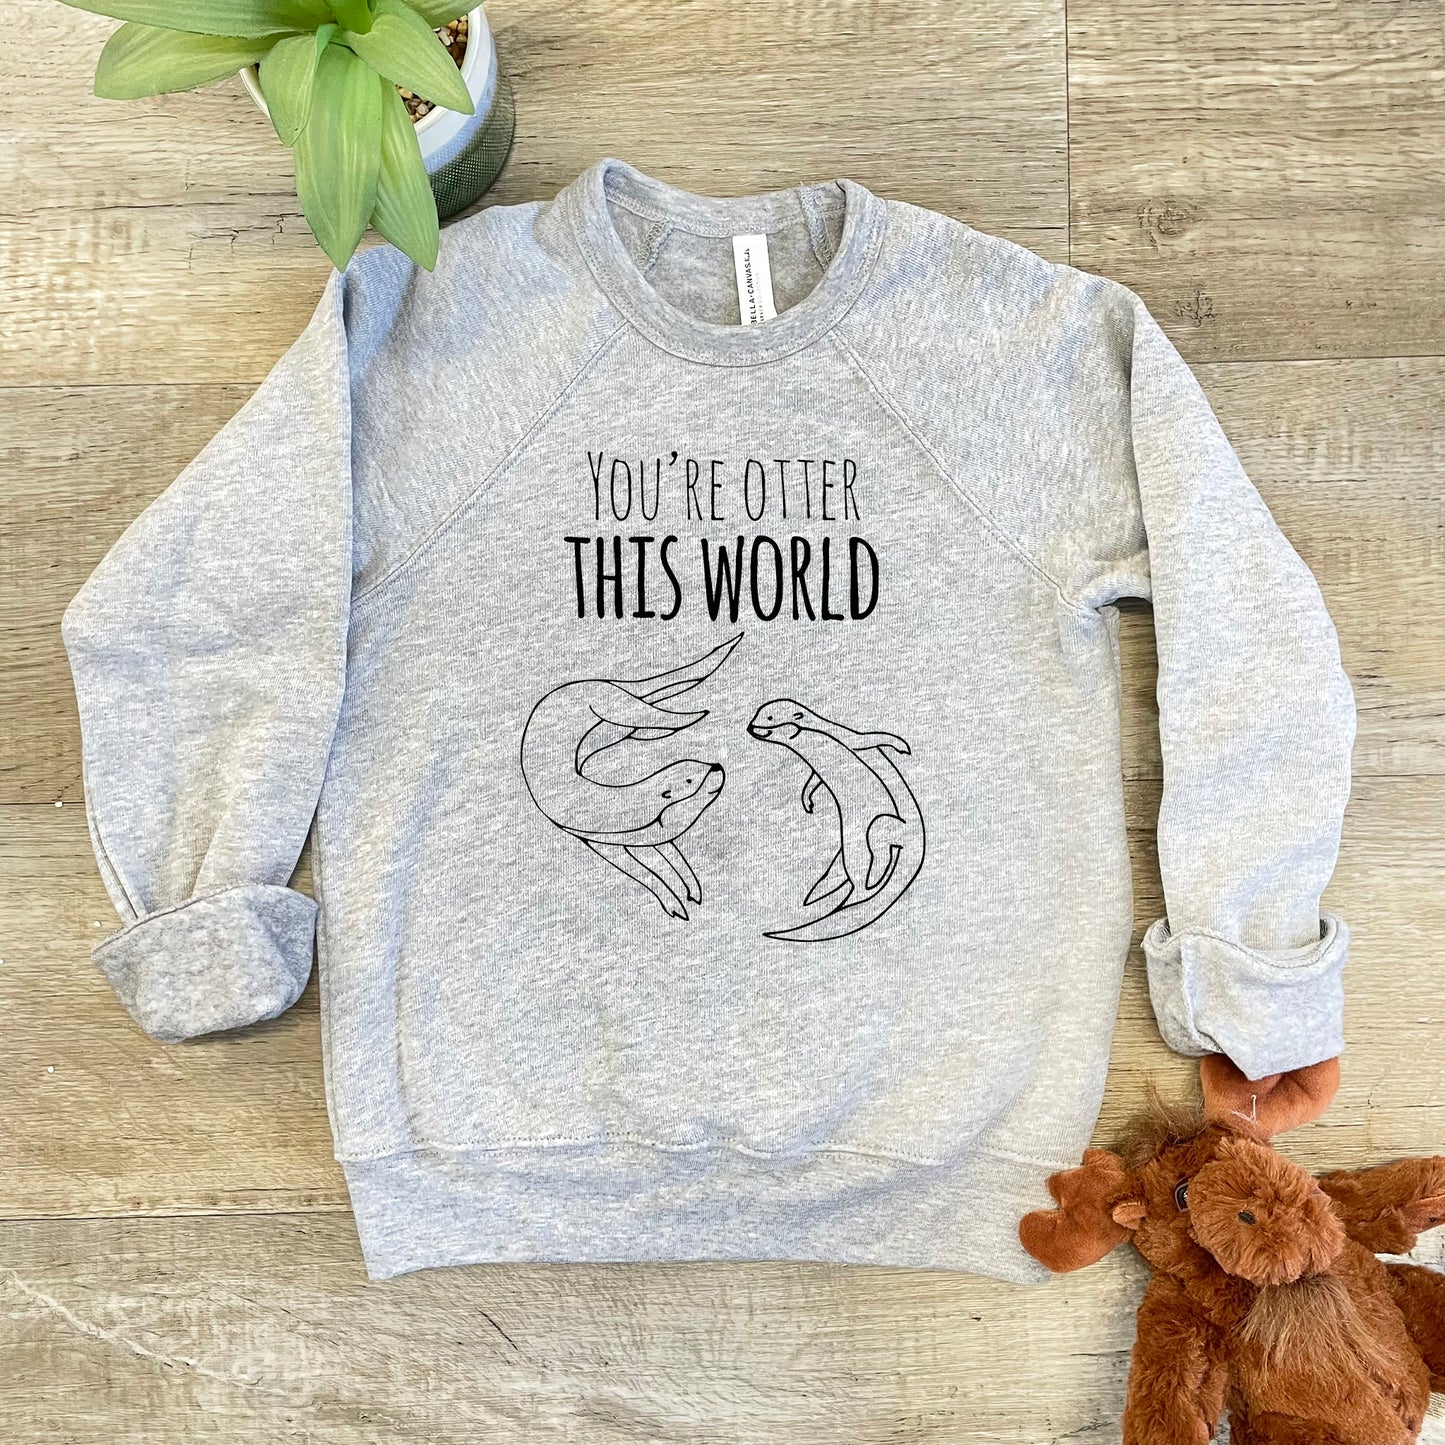 You're Otter This World - Kid's Sweatshirt - Heather Gray or Mauve